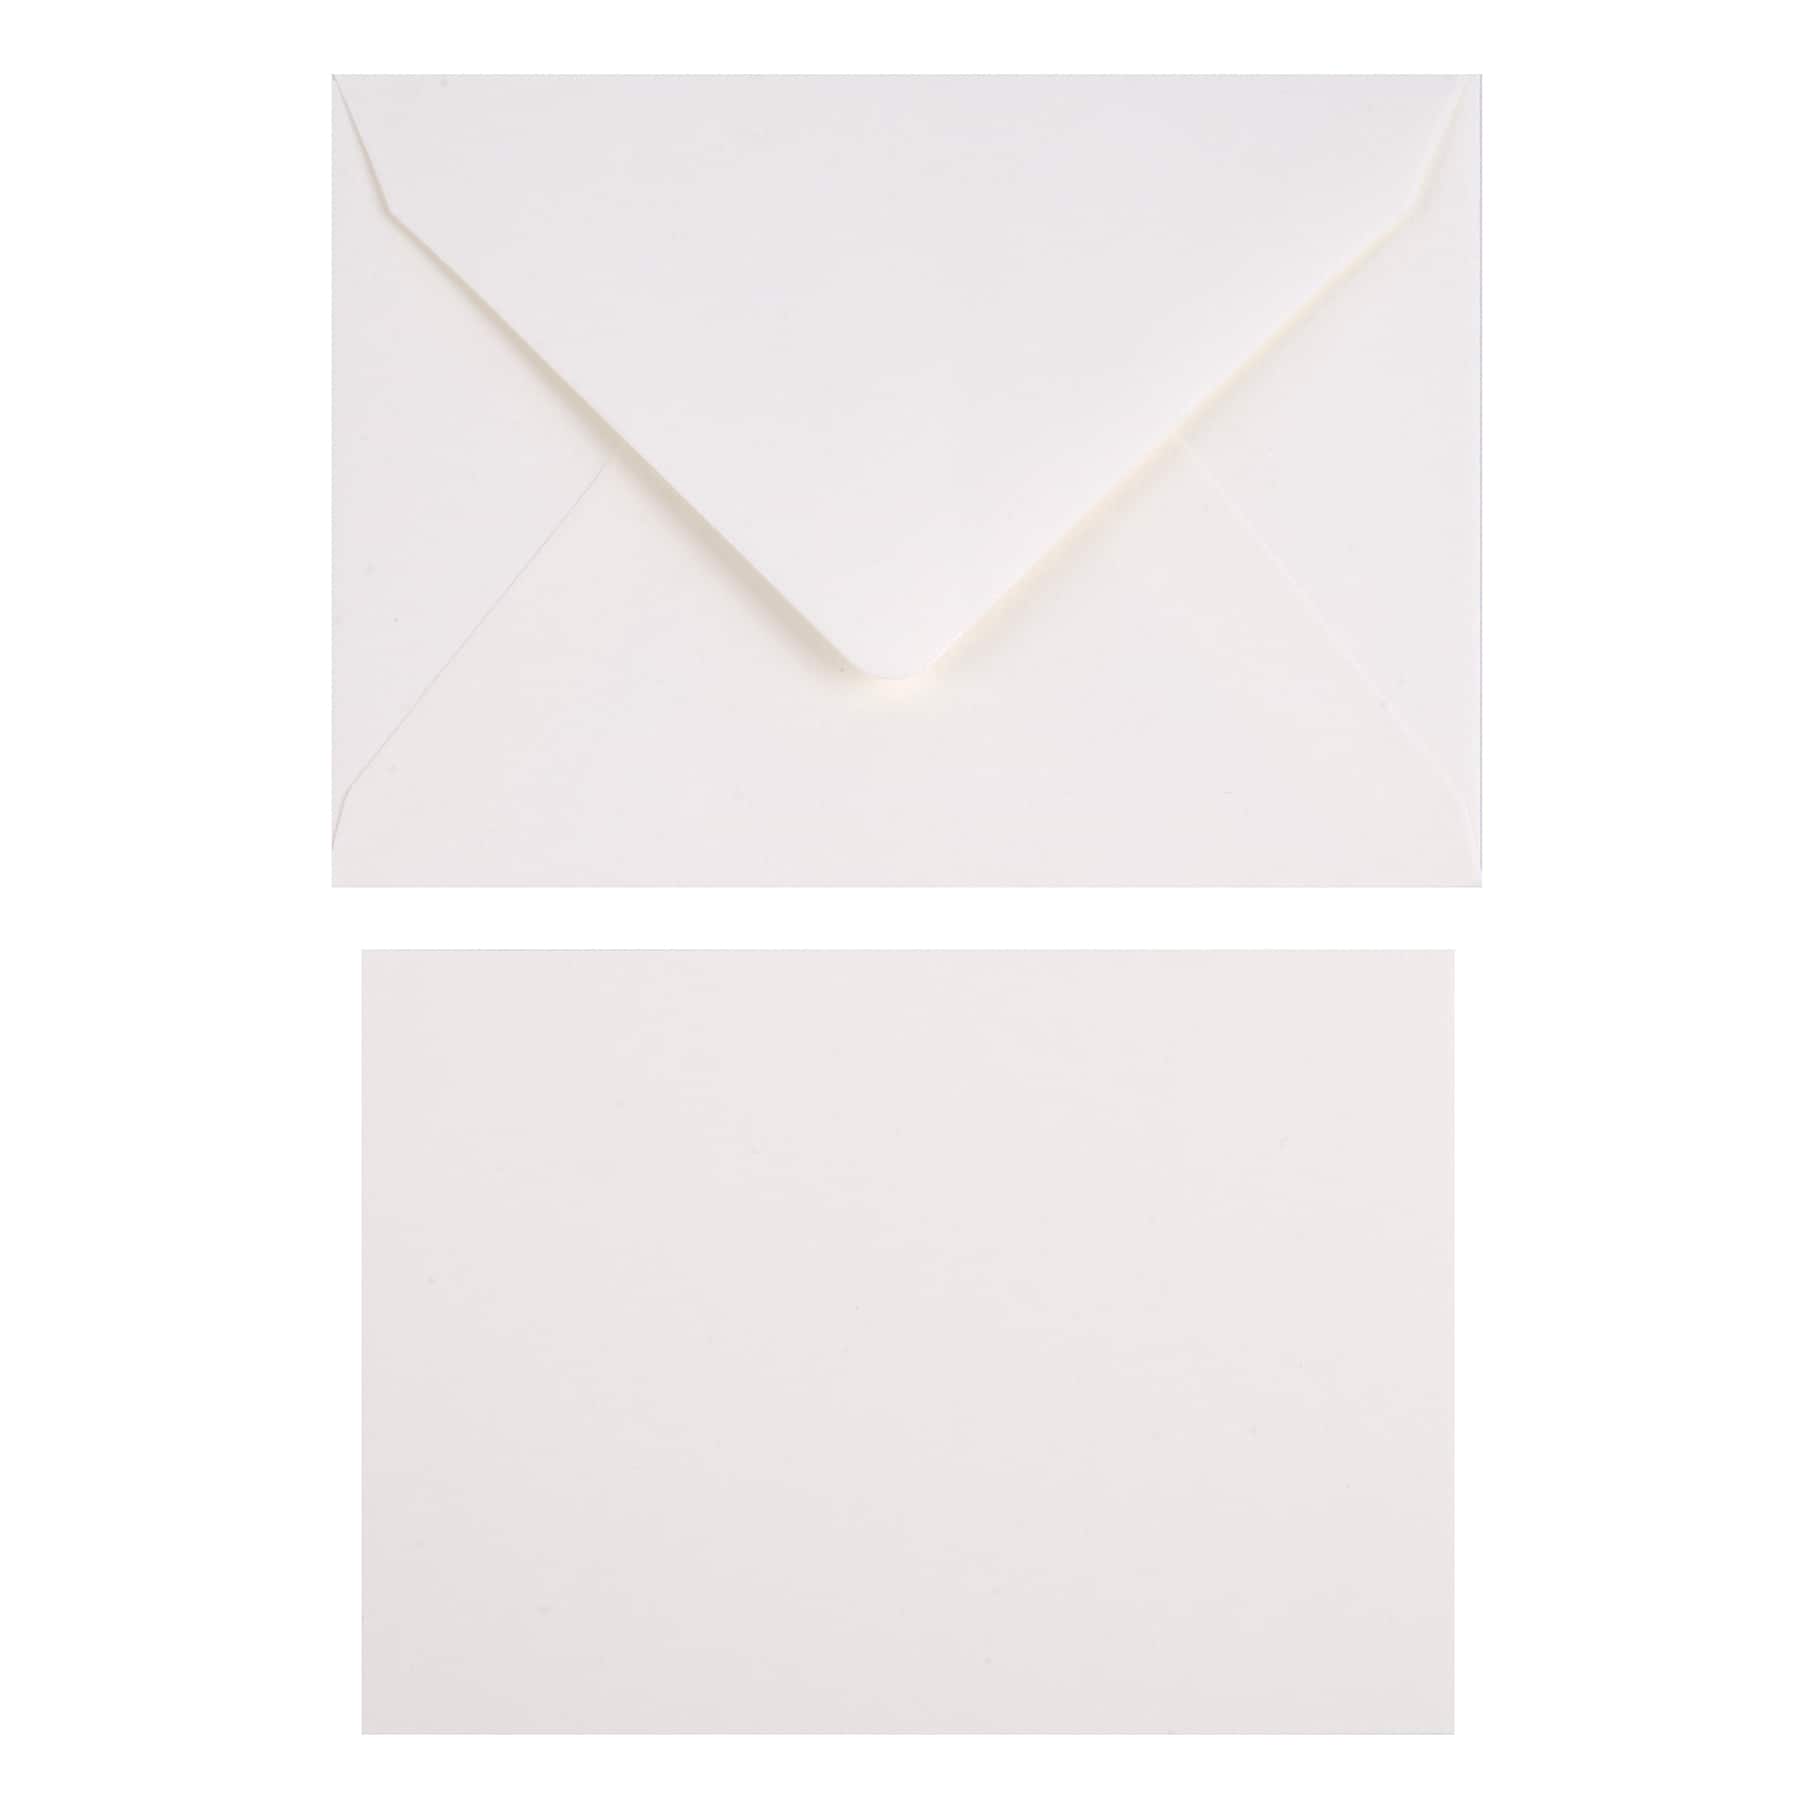 Shop For The Ivory Cards Envelopes By Recollections 2 5 X 3 5 At Michaels